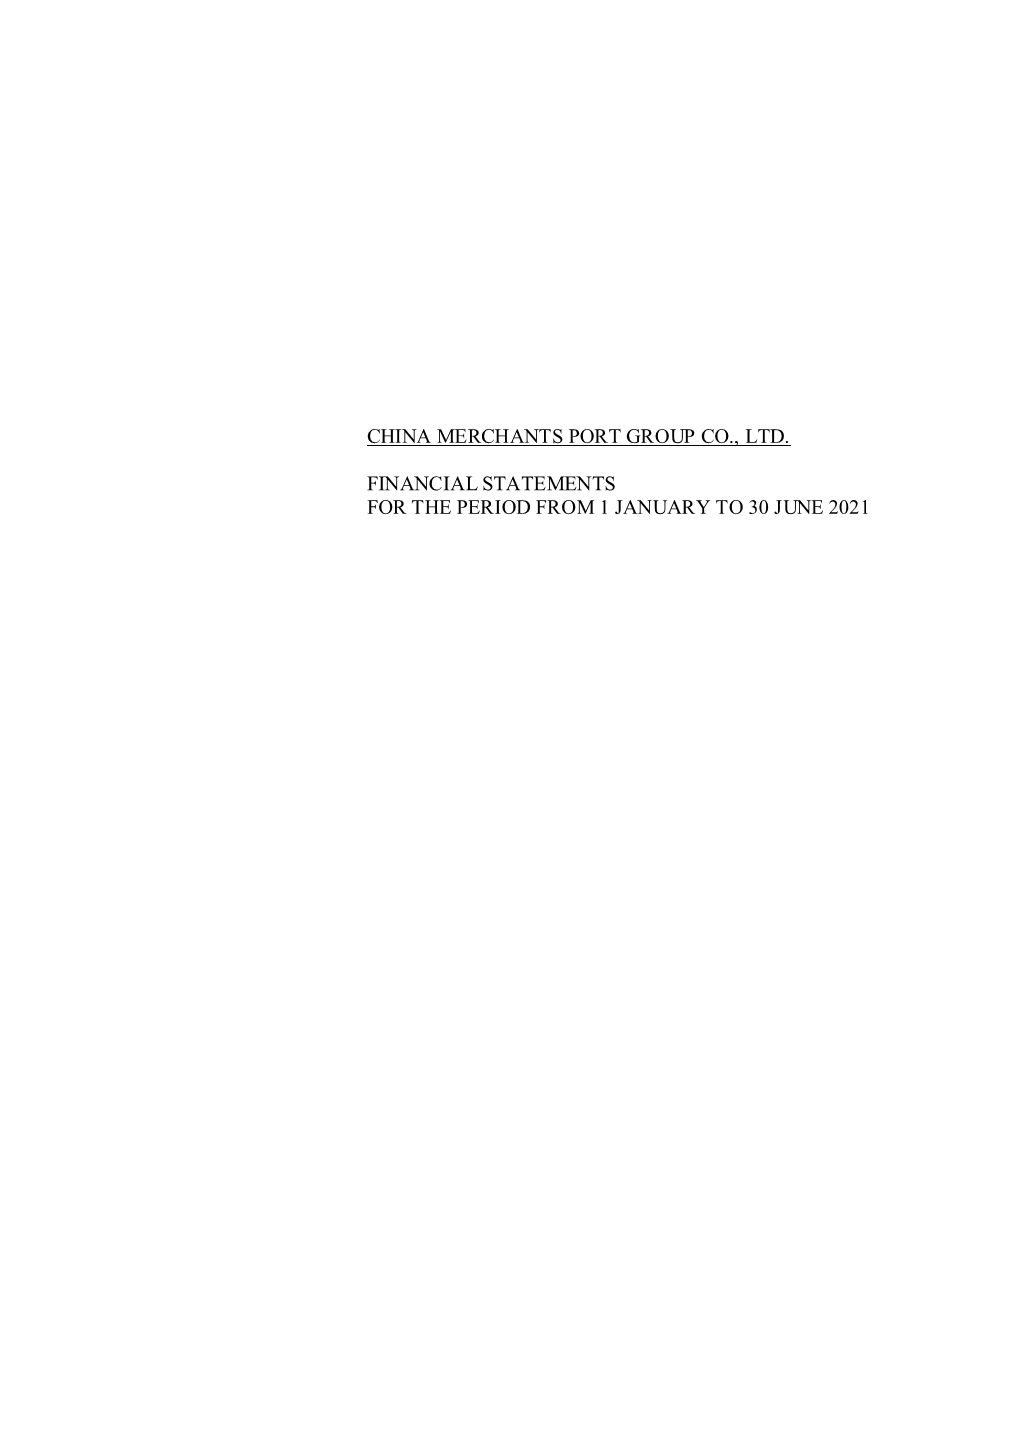 China Merchants Port Group Co., Ltd. Financial Statements for the Period